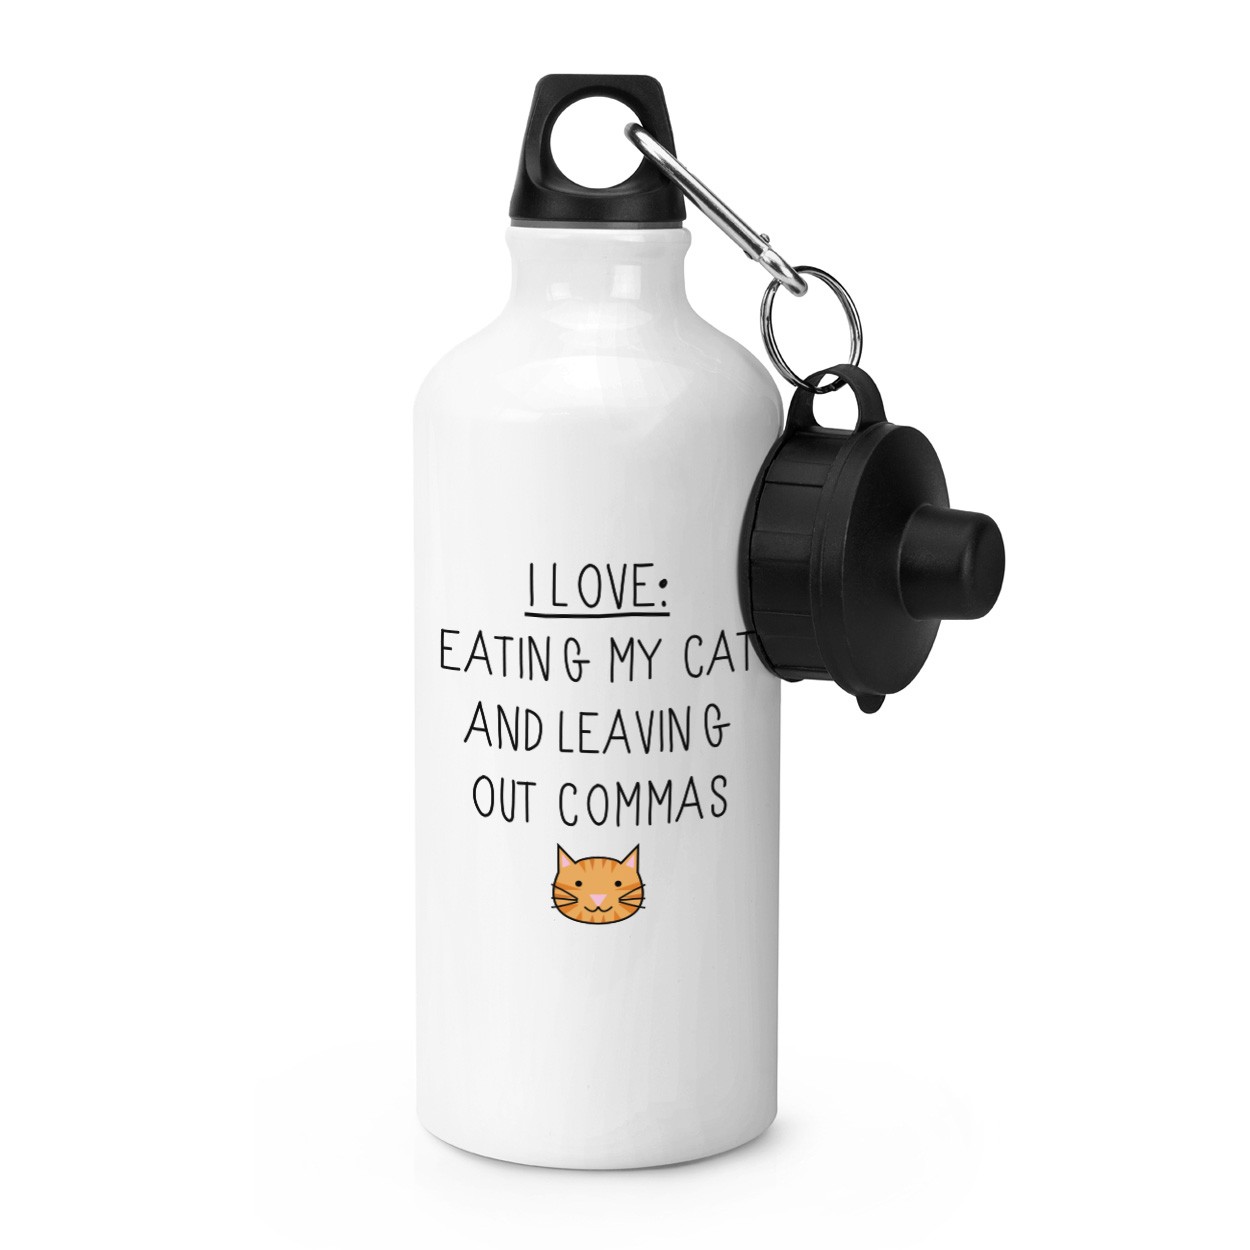 I Love Eating My Cat and Leaving Out Commas Sports Bottle